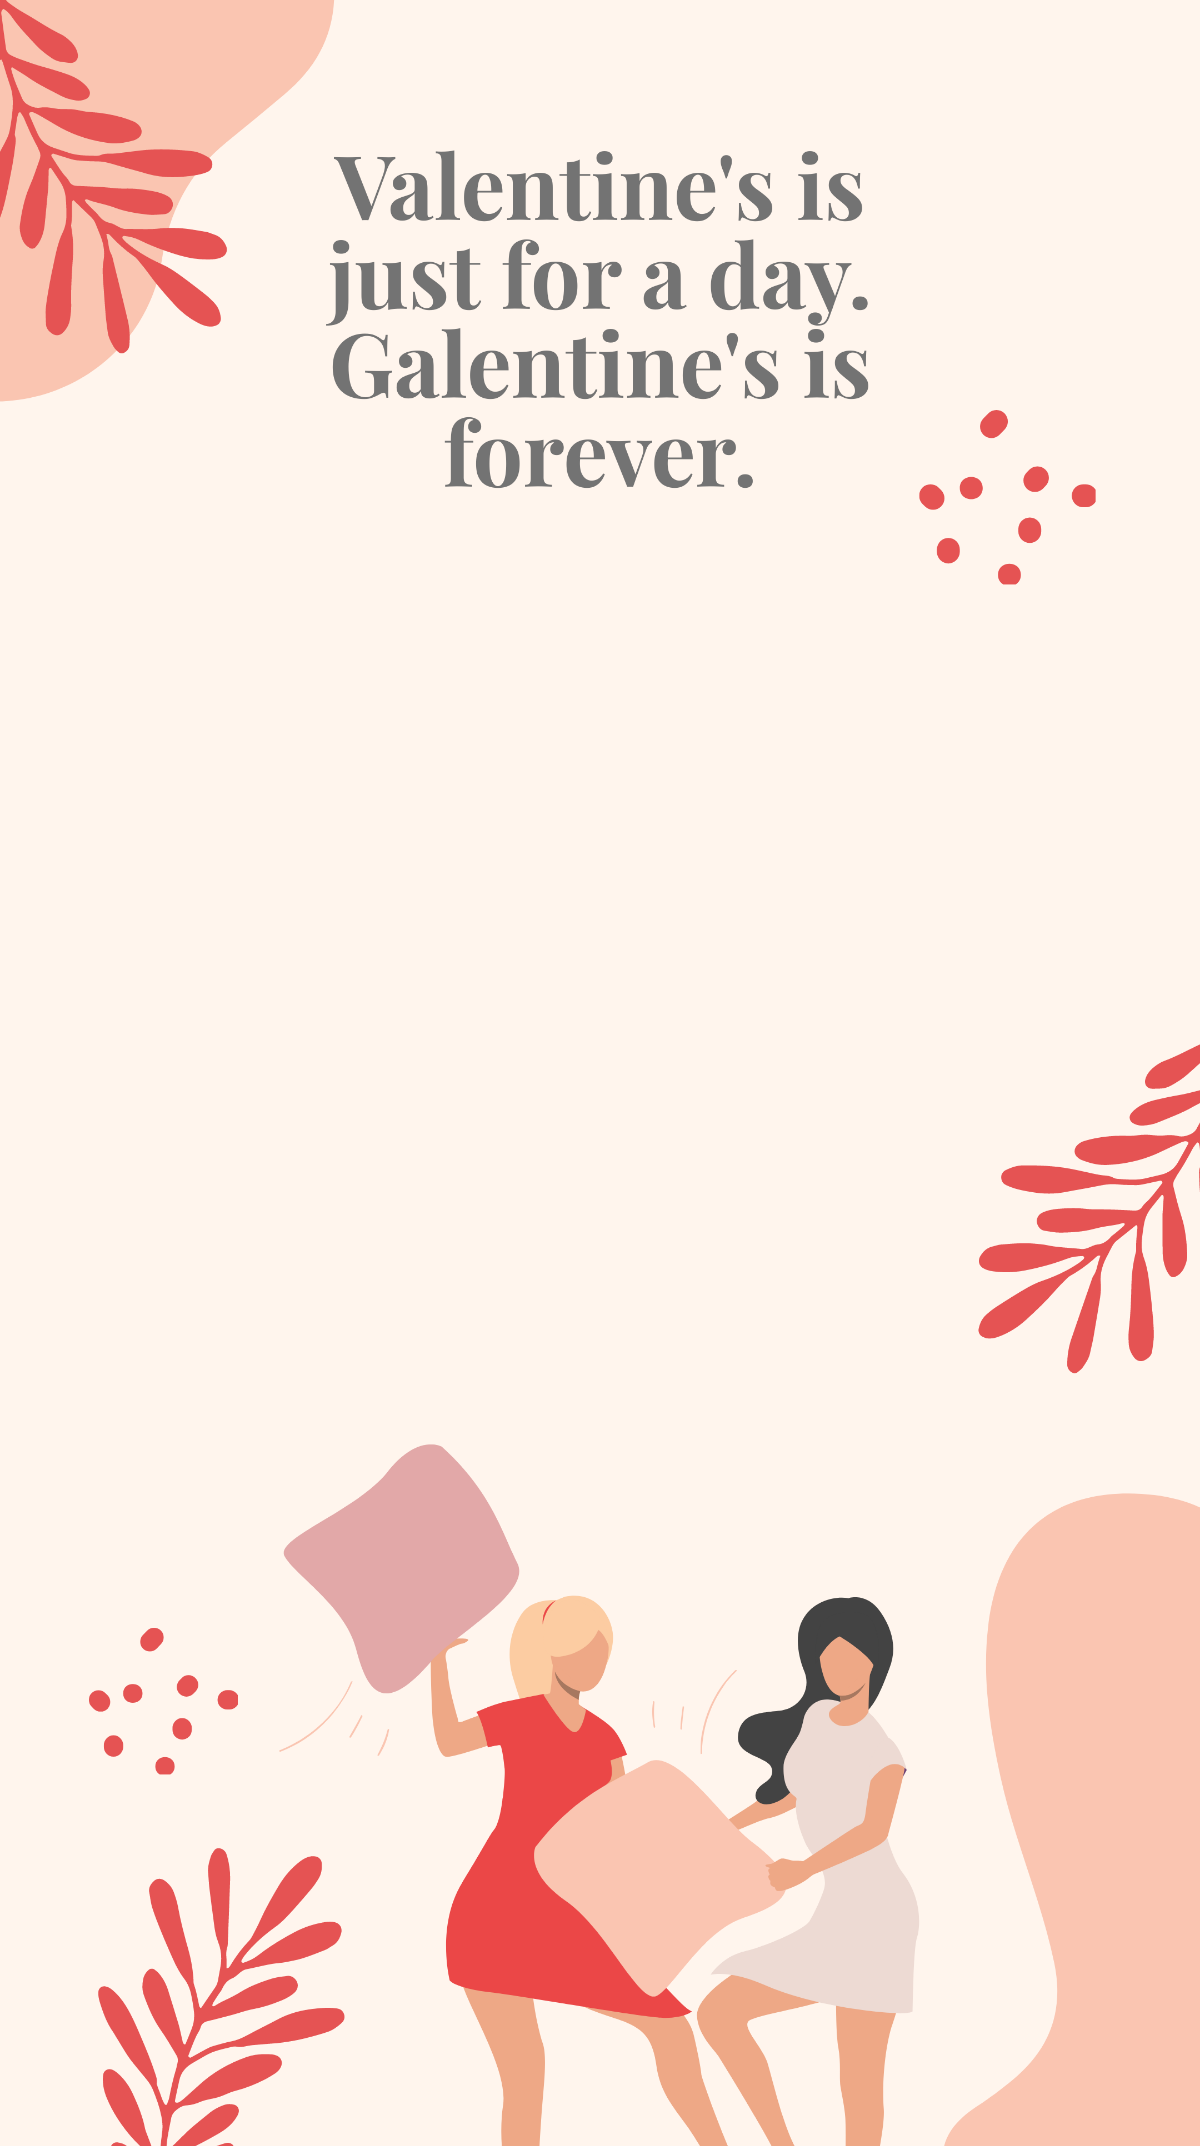 Funny Galentines Day Snapchat Geofilter Template